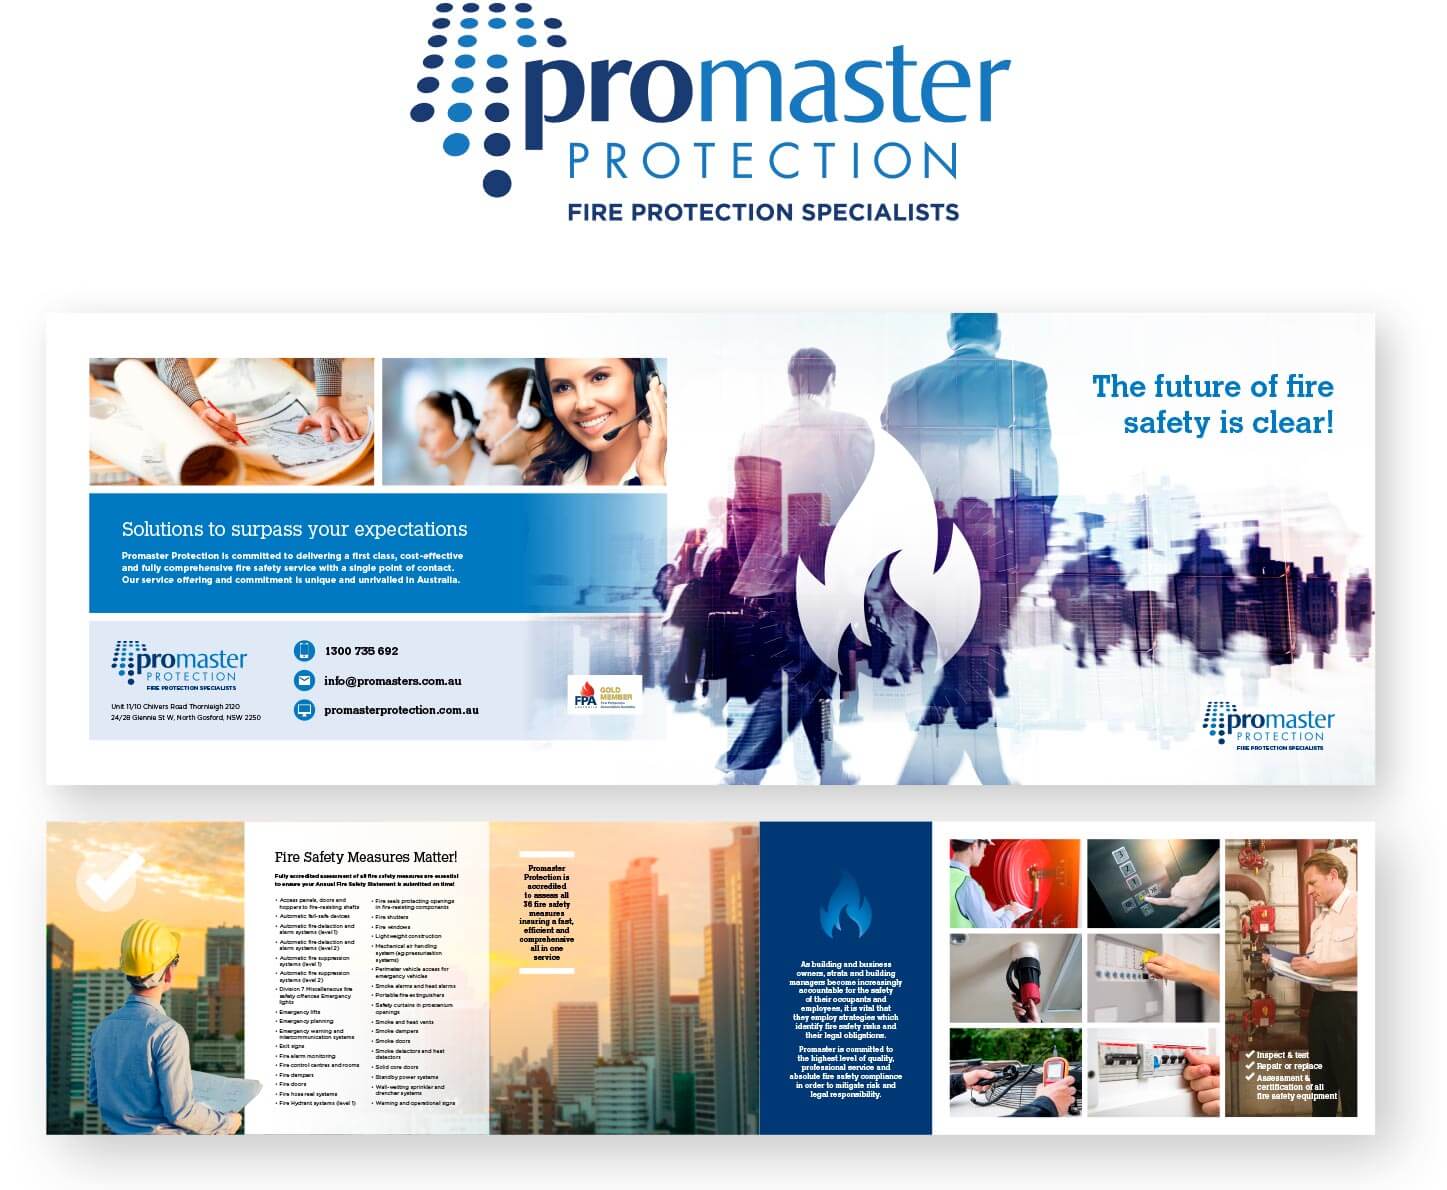 Promaster Protection collateral